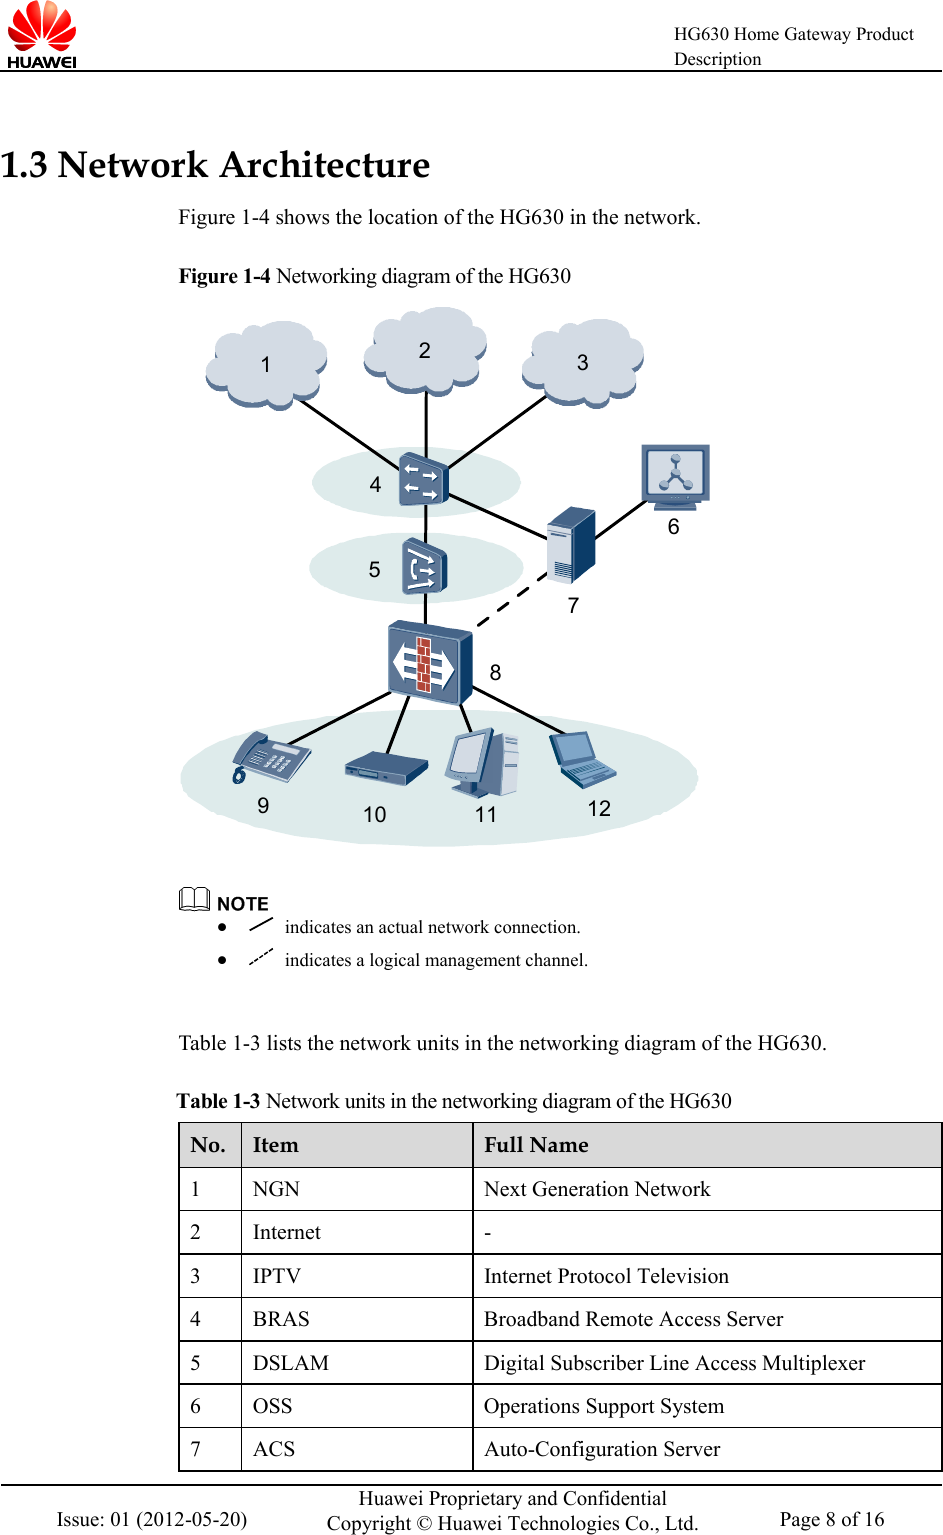    HG630 Home Gateway Product Description  Issue: 01 (2012-05-20) Huawei Proprietary and Confidential Copyright © Huawei Technologies Co., Ltd. Page 8 of 16  1.3 Network Architecture Figure 1-4 shows the location of the HG630 in the network. Figure 1-4 Networking diagram of the HG630 29811 12745316 10     indicates an actual network connection.    indicates a logical management channel.  Table 1-3 lists the network units in the networking diagram of the HG630.   Table 1-3 Network units in the networking diagram of the HG630 No. Item Full Name 1  NGN Next Generation Network 2  Internet  - 3  IPTV Internet Protocol Television 4  BRAS  Broadband Remote Access Server 5  DSLAM Digital Subscriber Line Access Multiplexer 6  OSS Operations Support System 7  ACS Auto-Configuration Server 